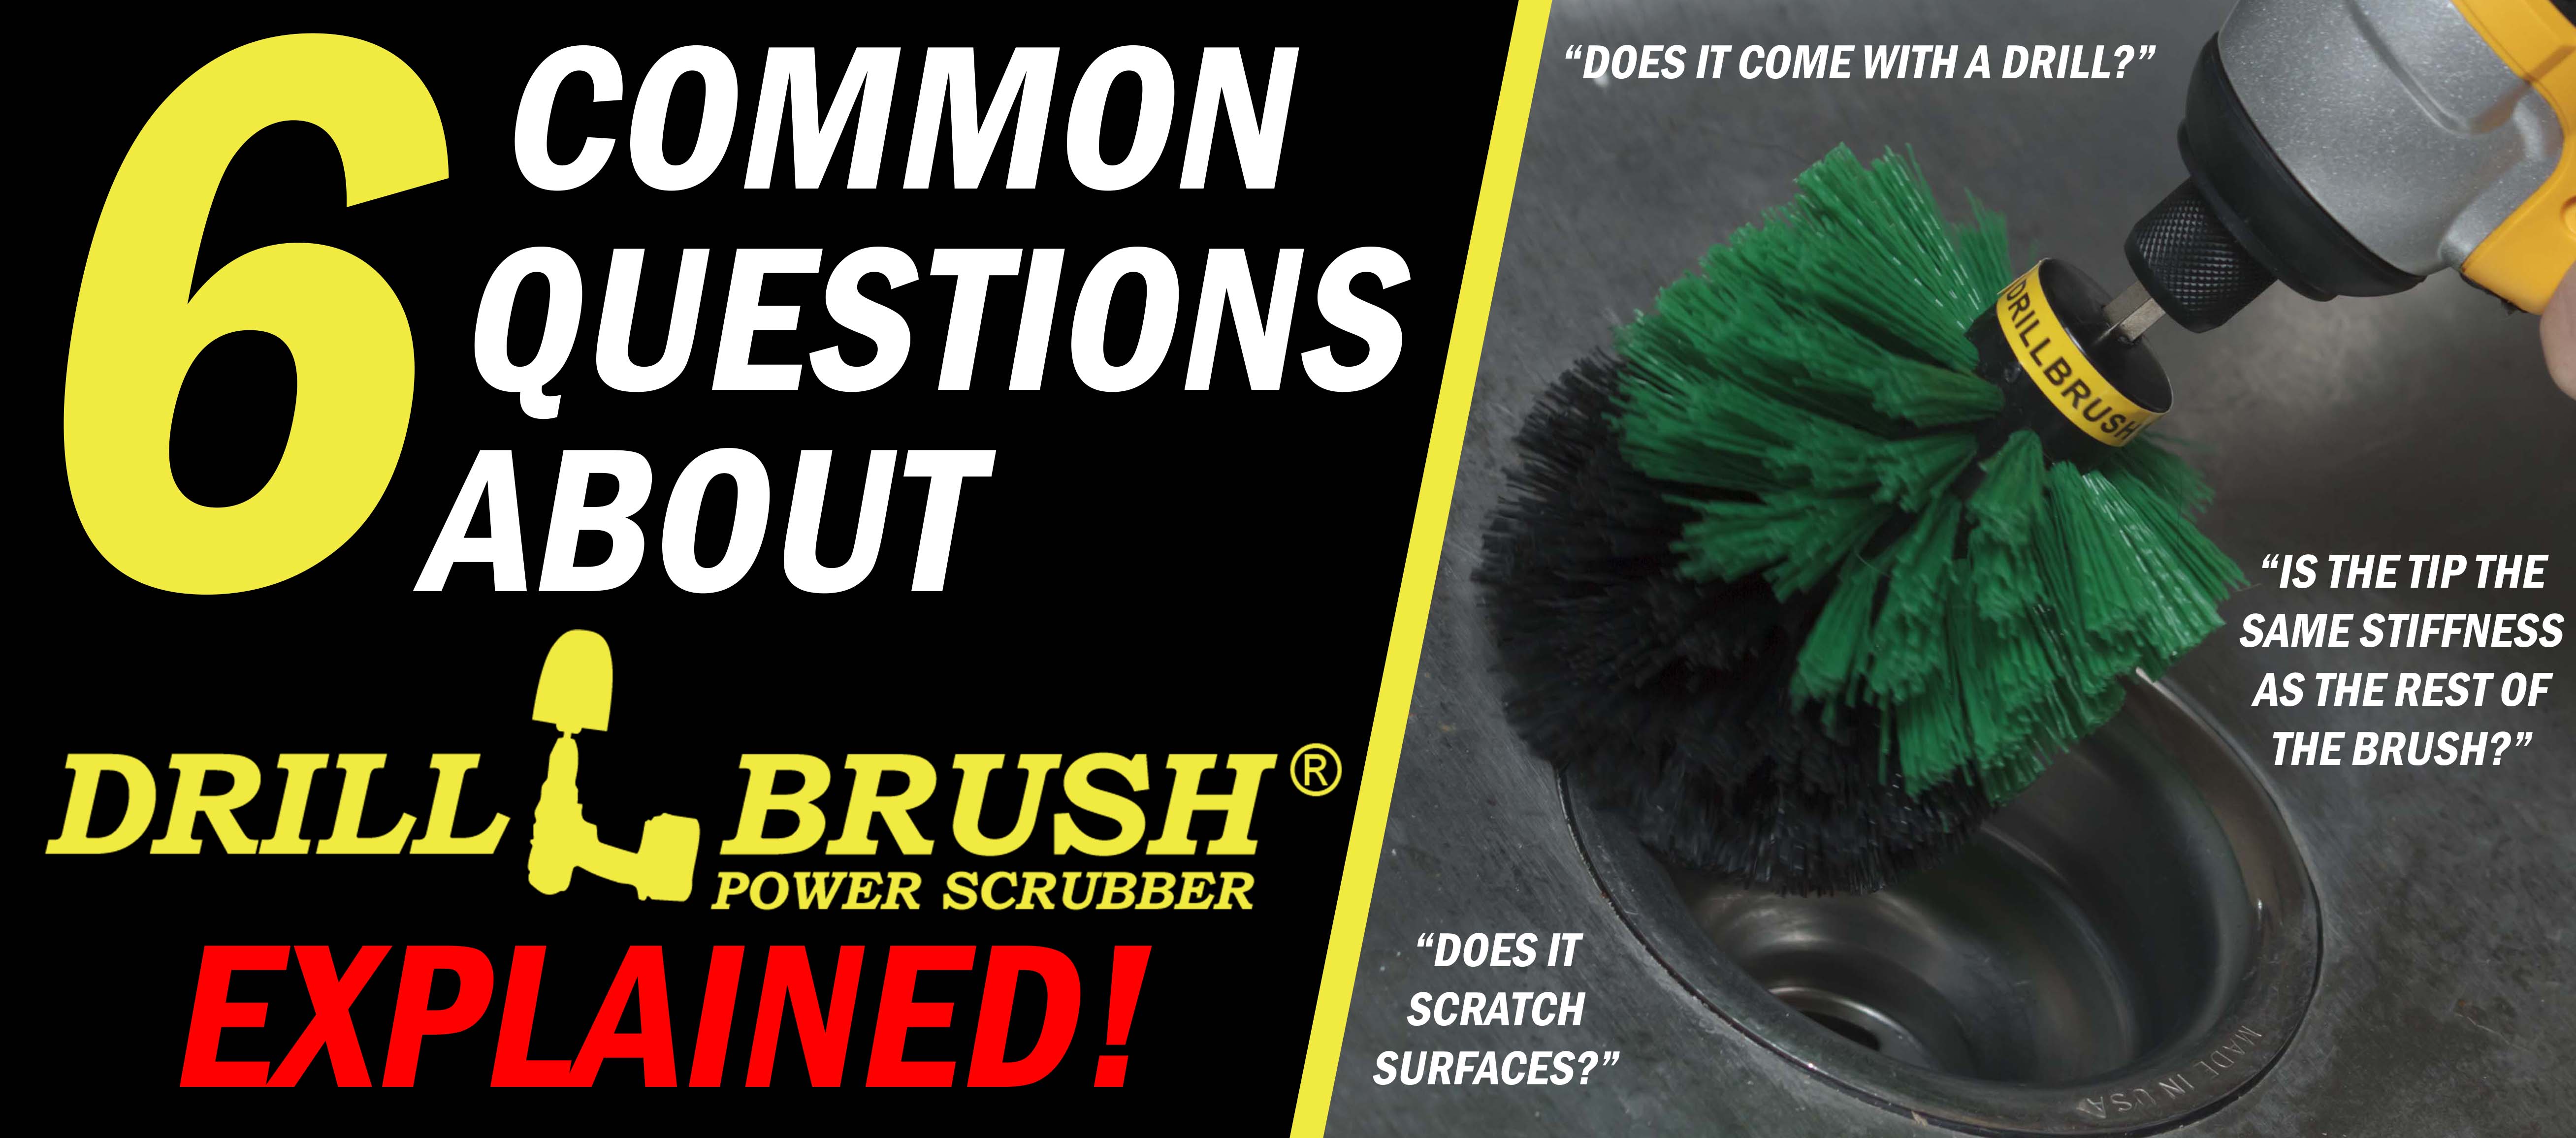 6 Common Questions About the Drillbrush Power Scrubber Explained!